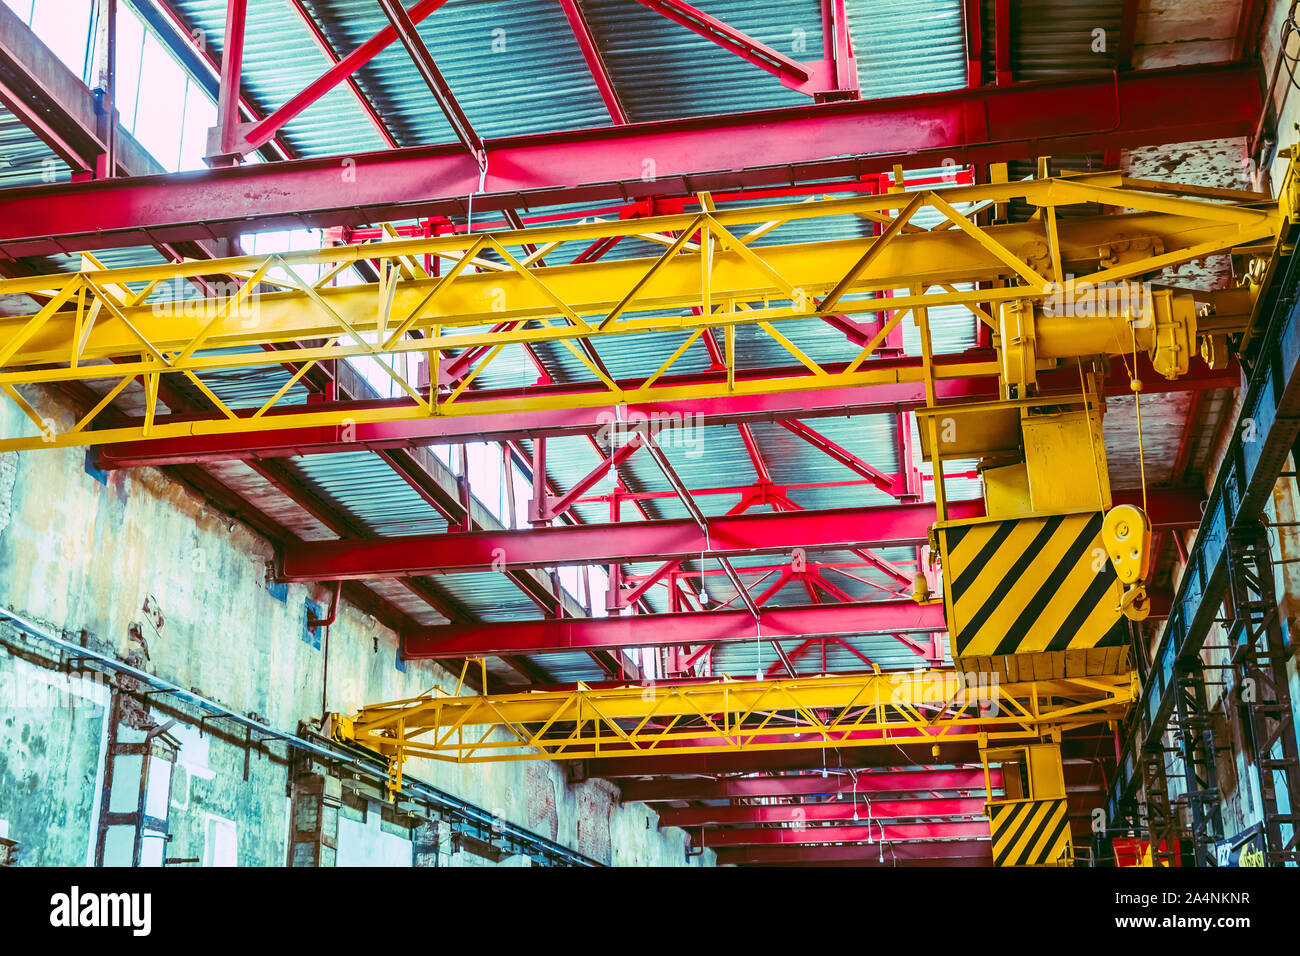 The interior of a big industrial building or factory with steel constructions Stock Photo